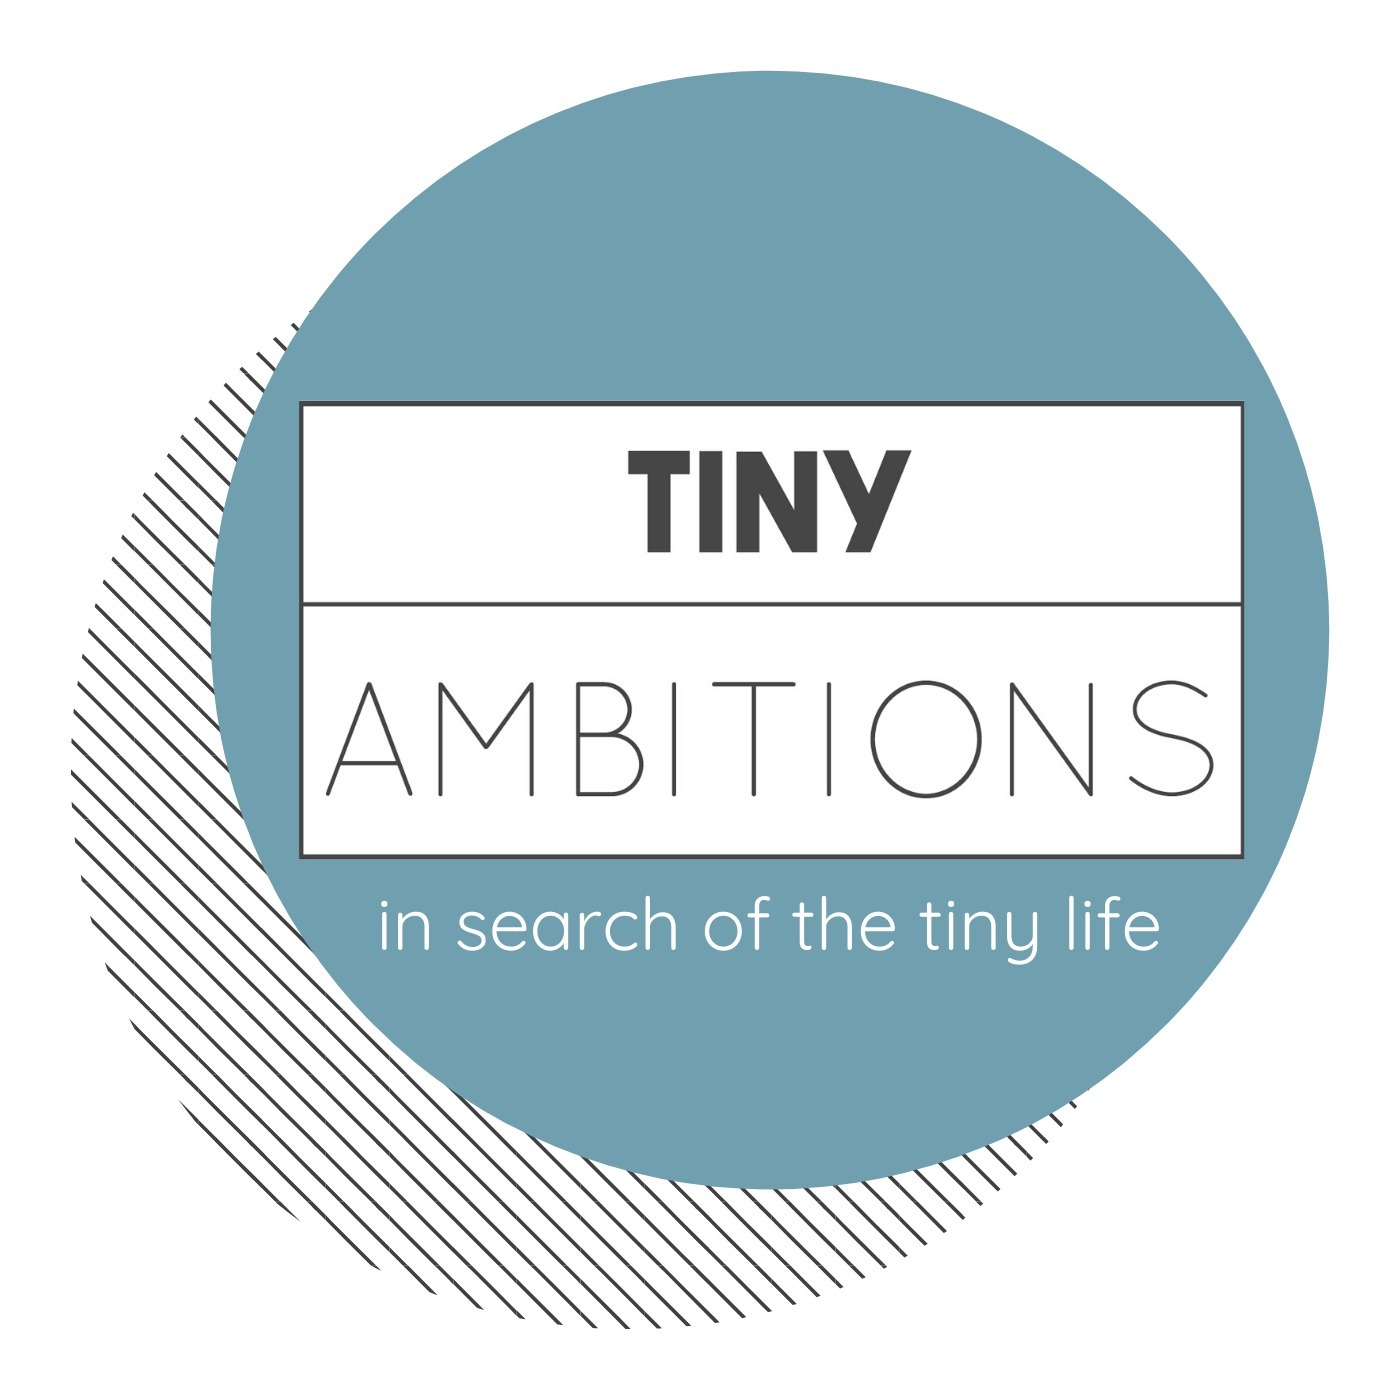 Tiny Ambitions Trailer: In Search of the Tiny Life